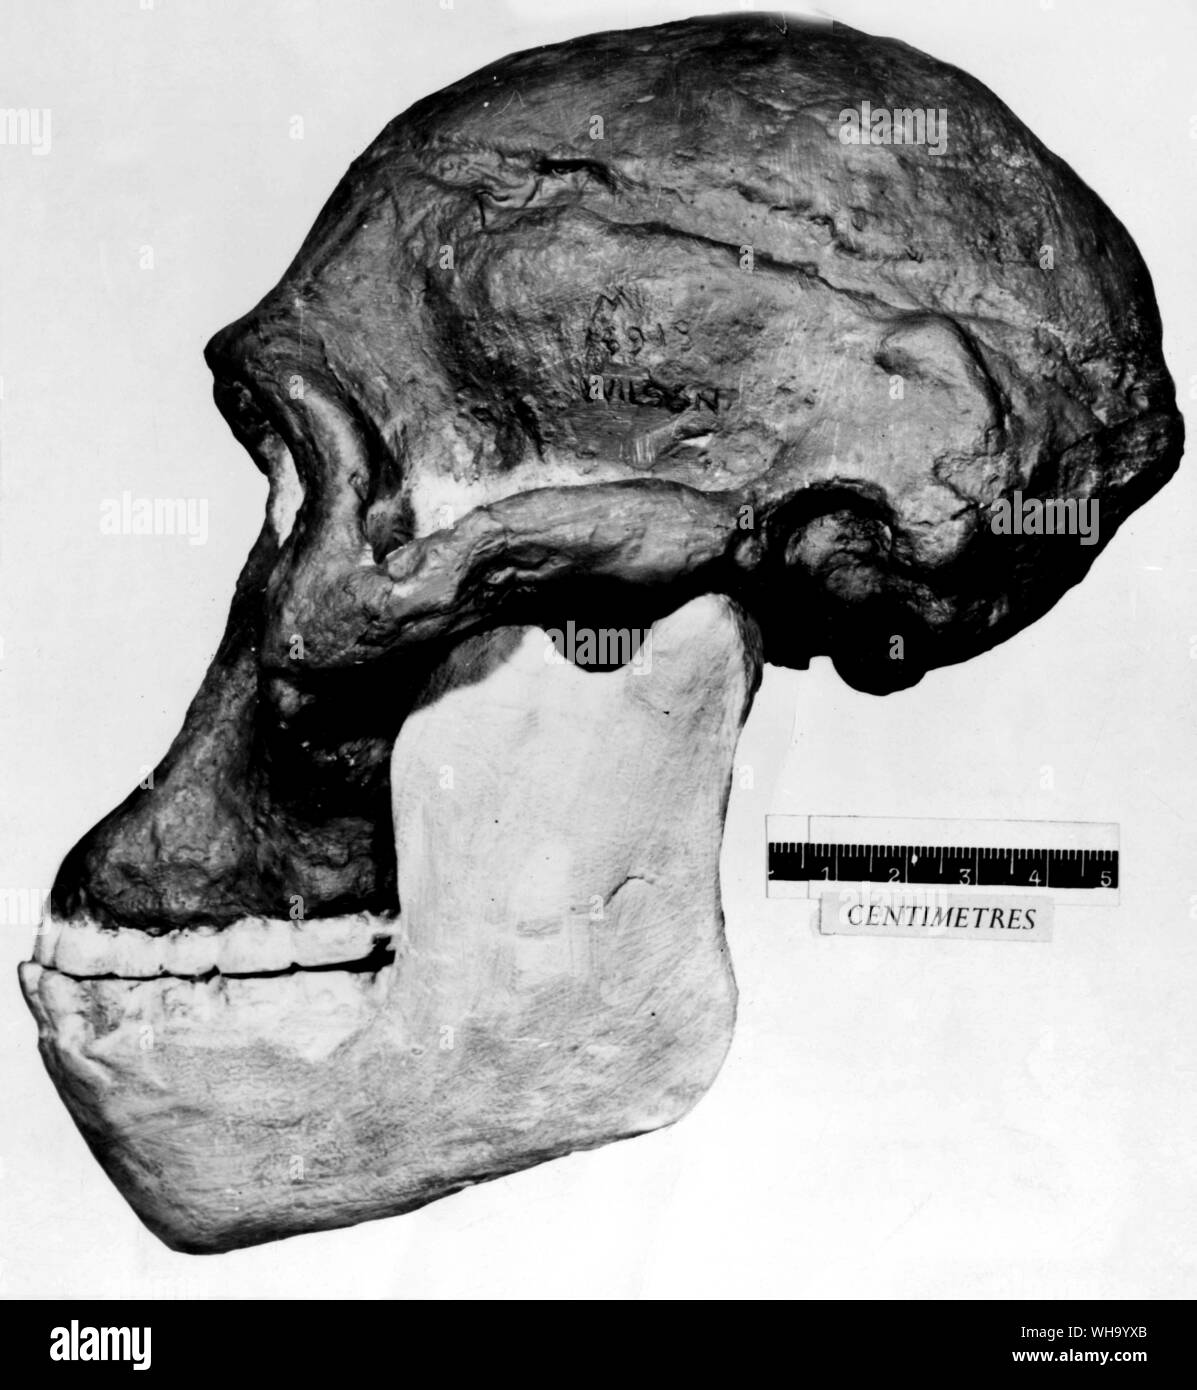 Skull of Africanus, a South African ape man. Stock Photo